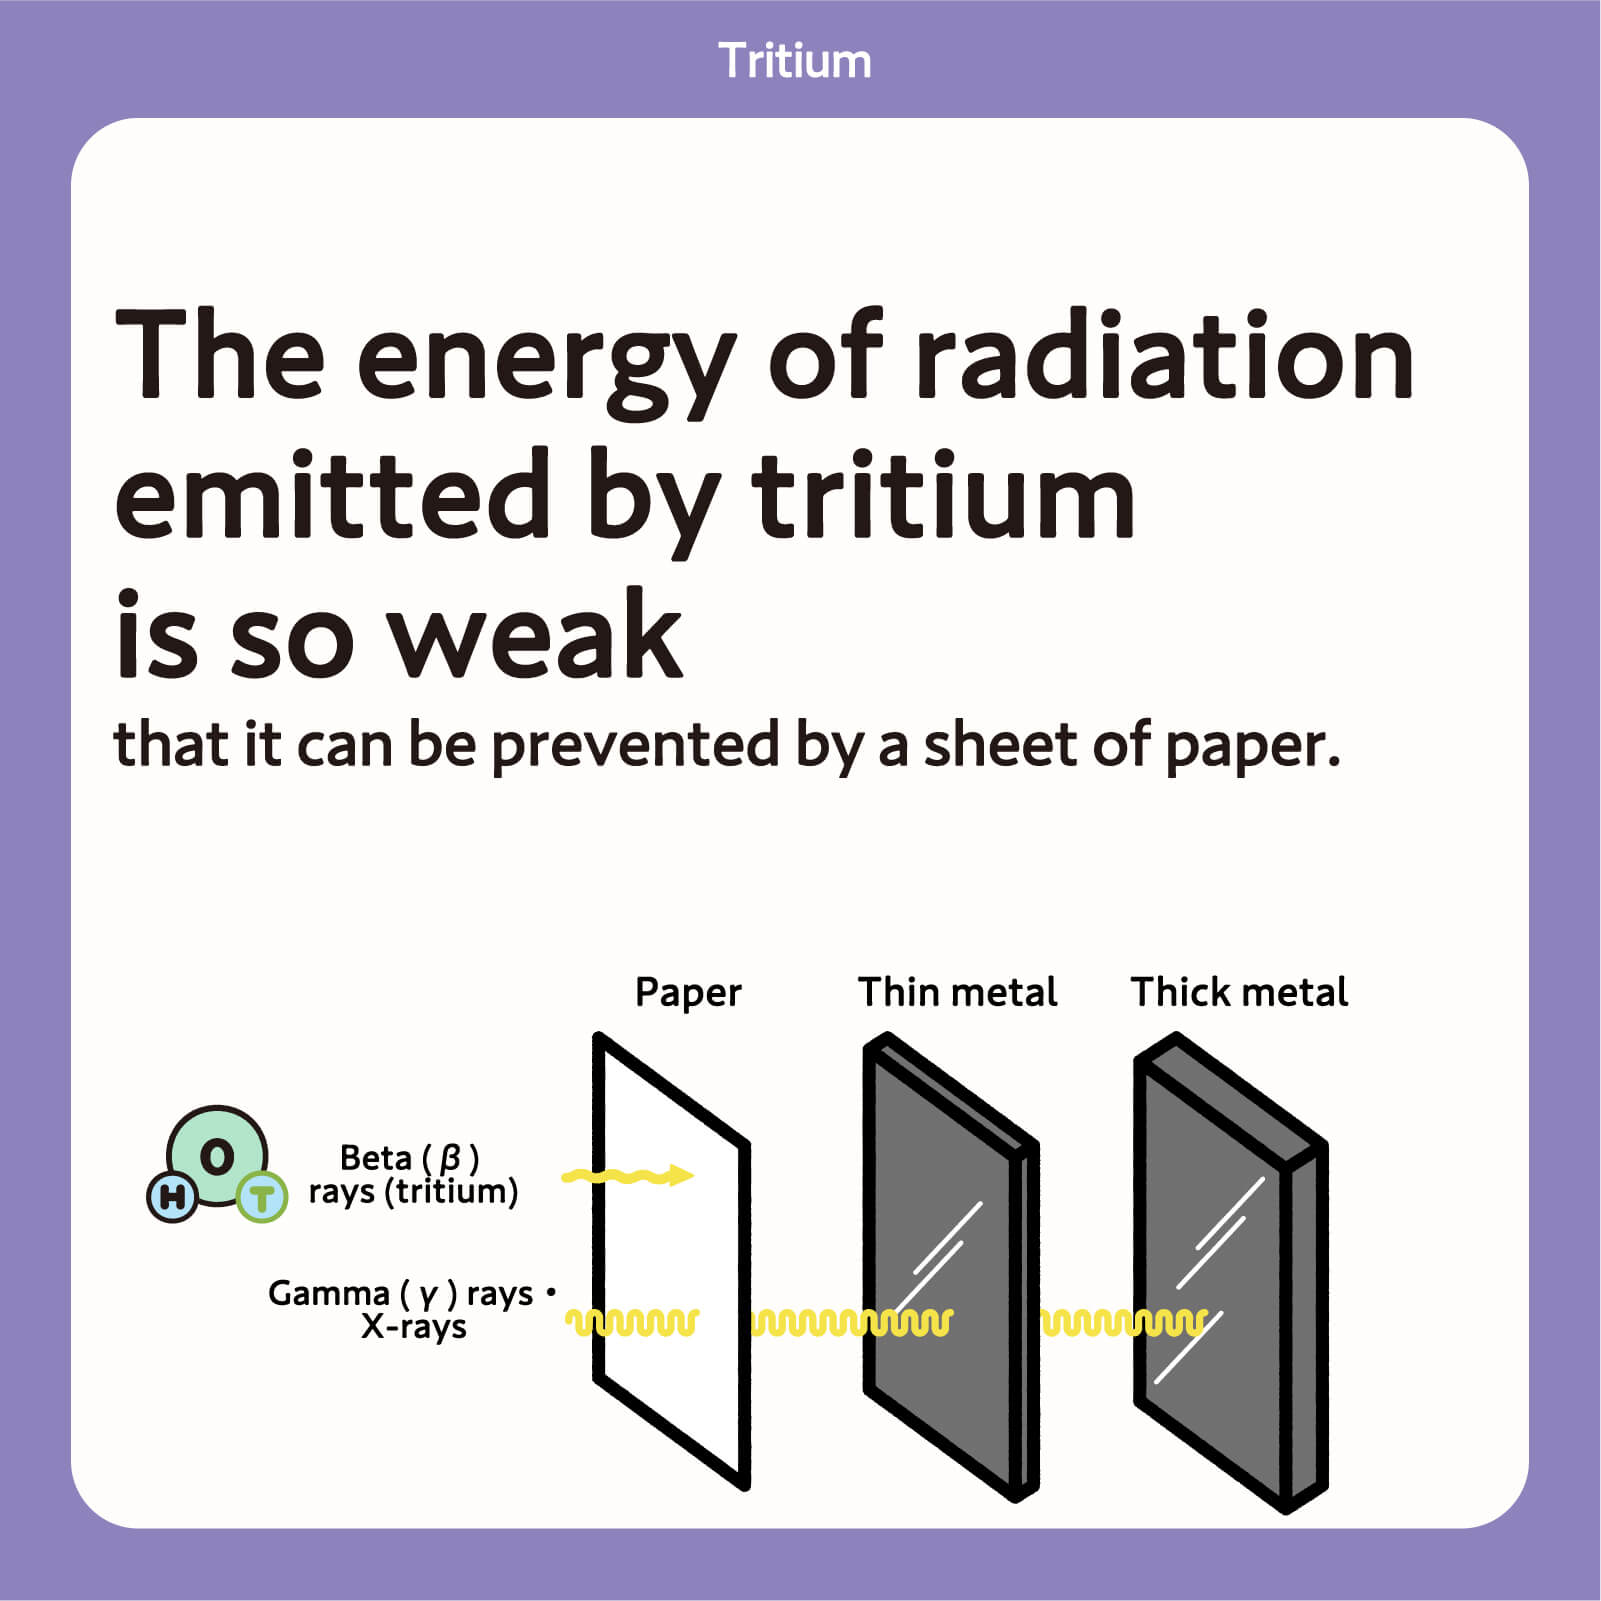 The energy of radiation emitted by tritium is so weak that it can be prevented by a sheet of paper.